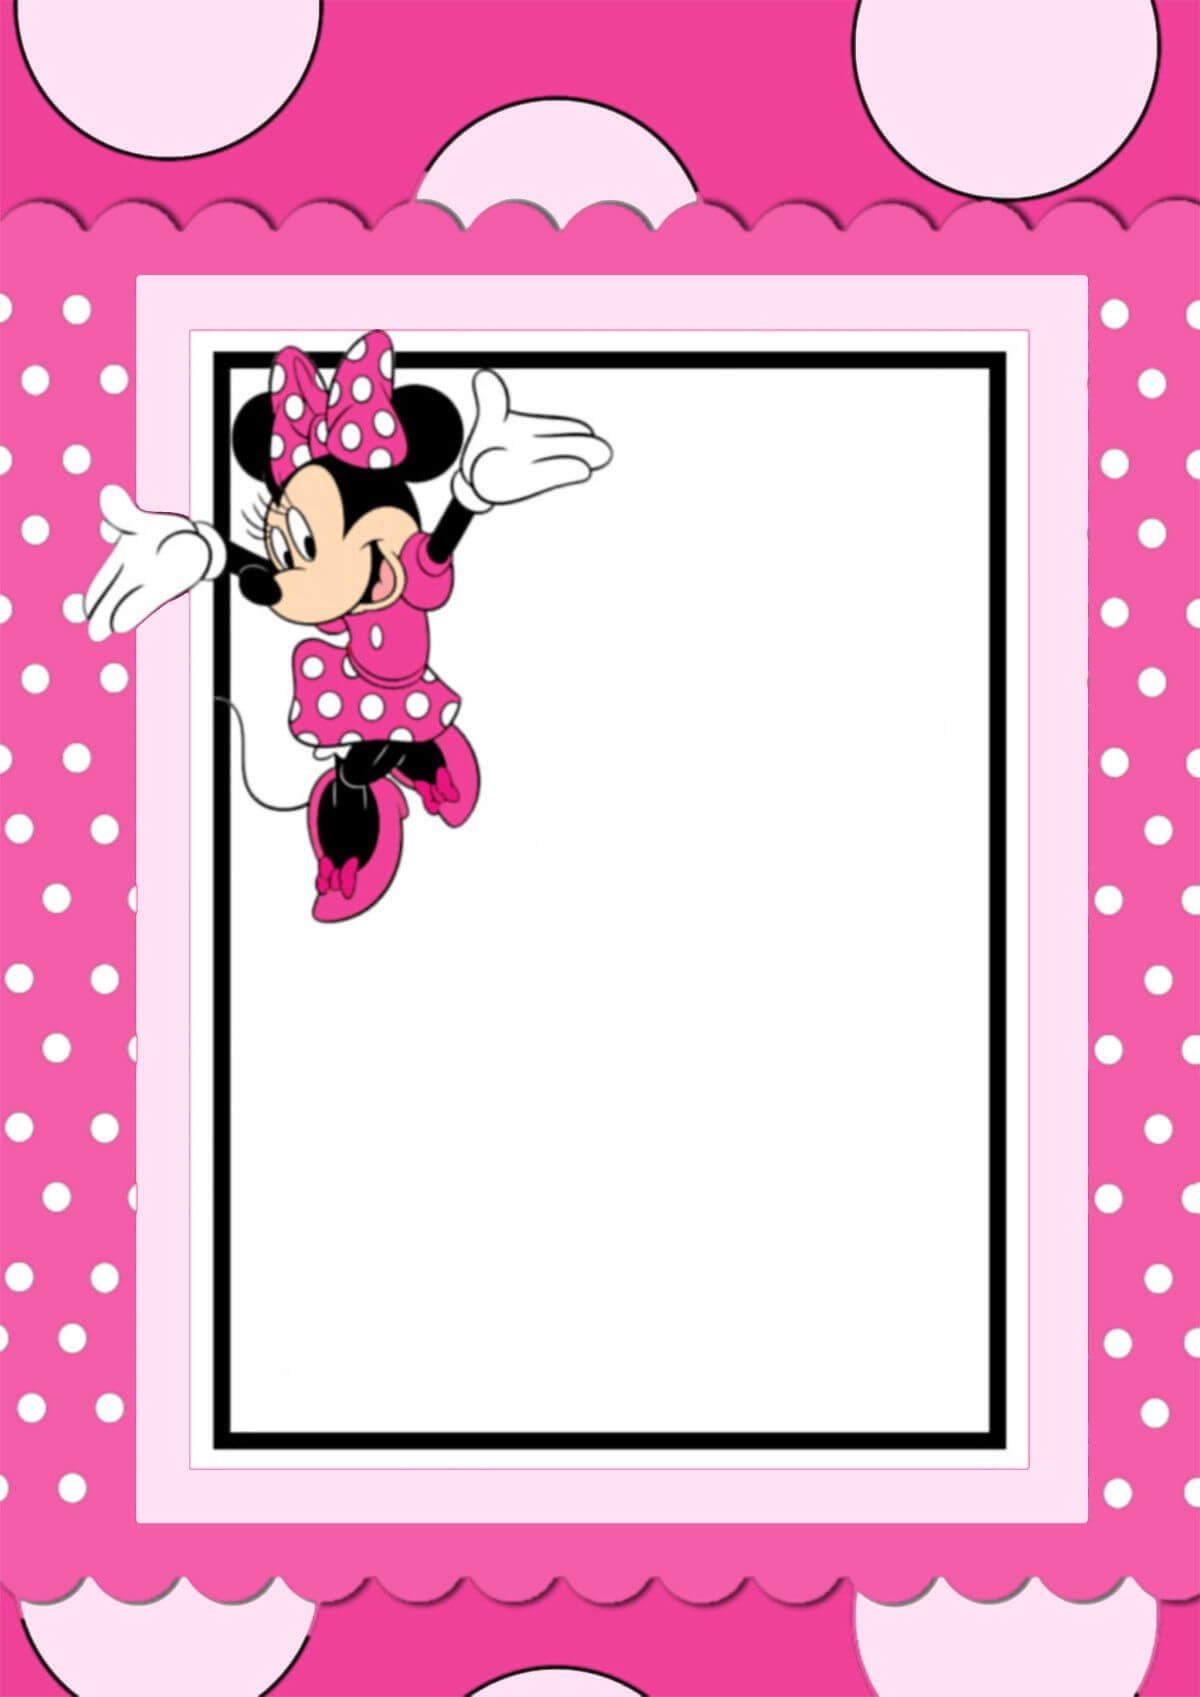 Free Printable Minnie Mouse Invitation Card | Free With Minnie Mouse Card Templates